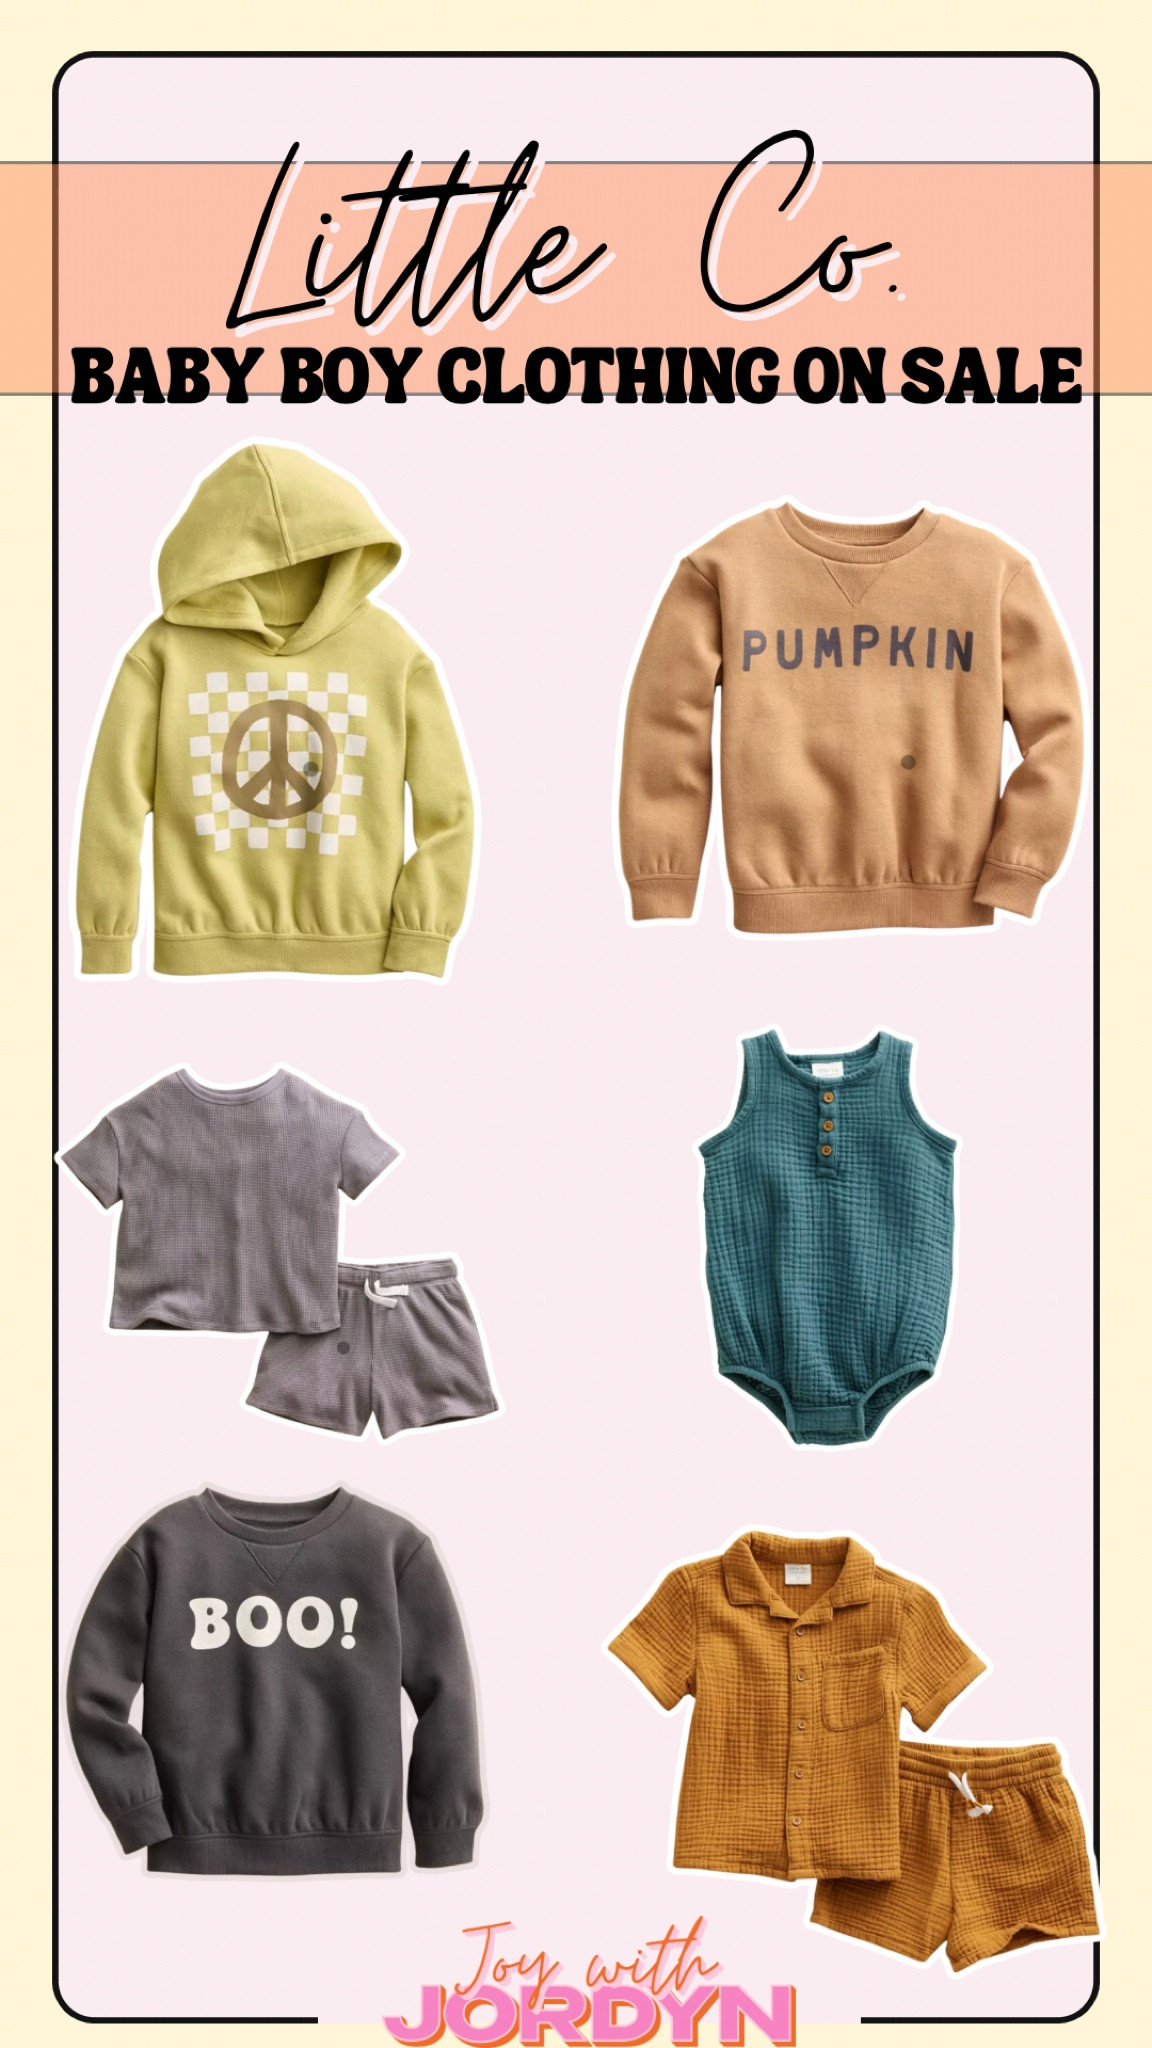 My Fall Little Co. Kids Collection is Here - Lauren Conrad